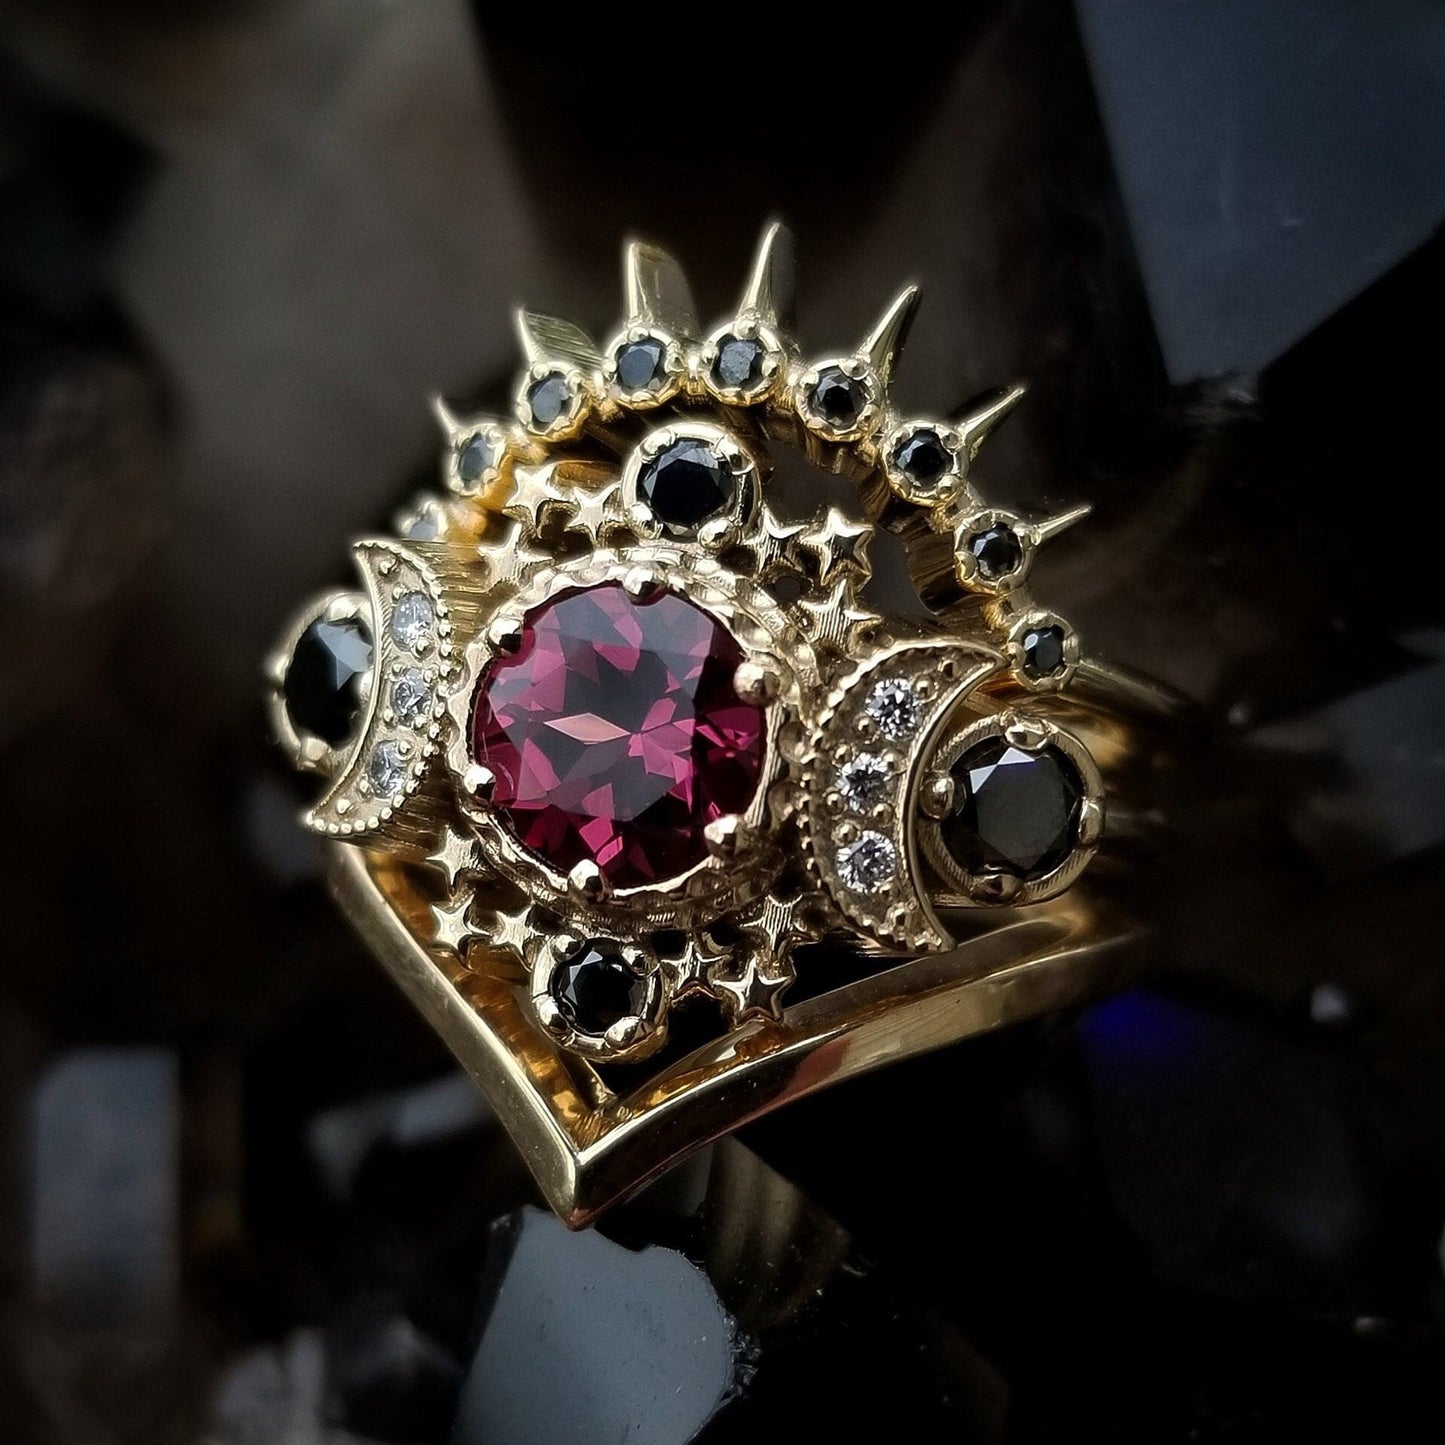 Cosmos Moon and Stars Engagement Ring 3 Ring Set with Rhodolite Garnet & Diamonds - Gothic Gold Wedding Set